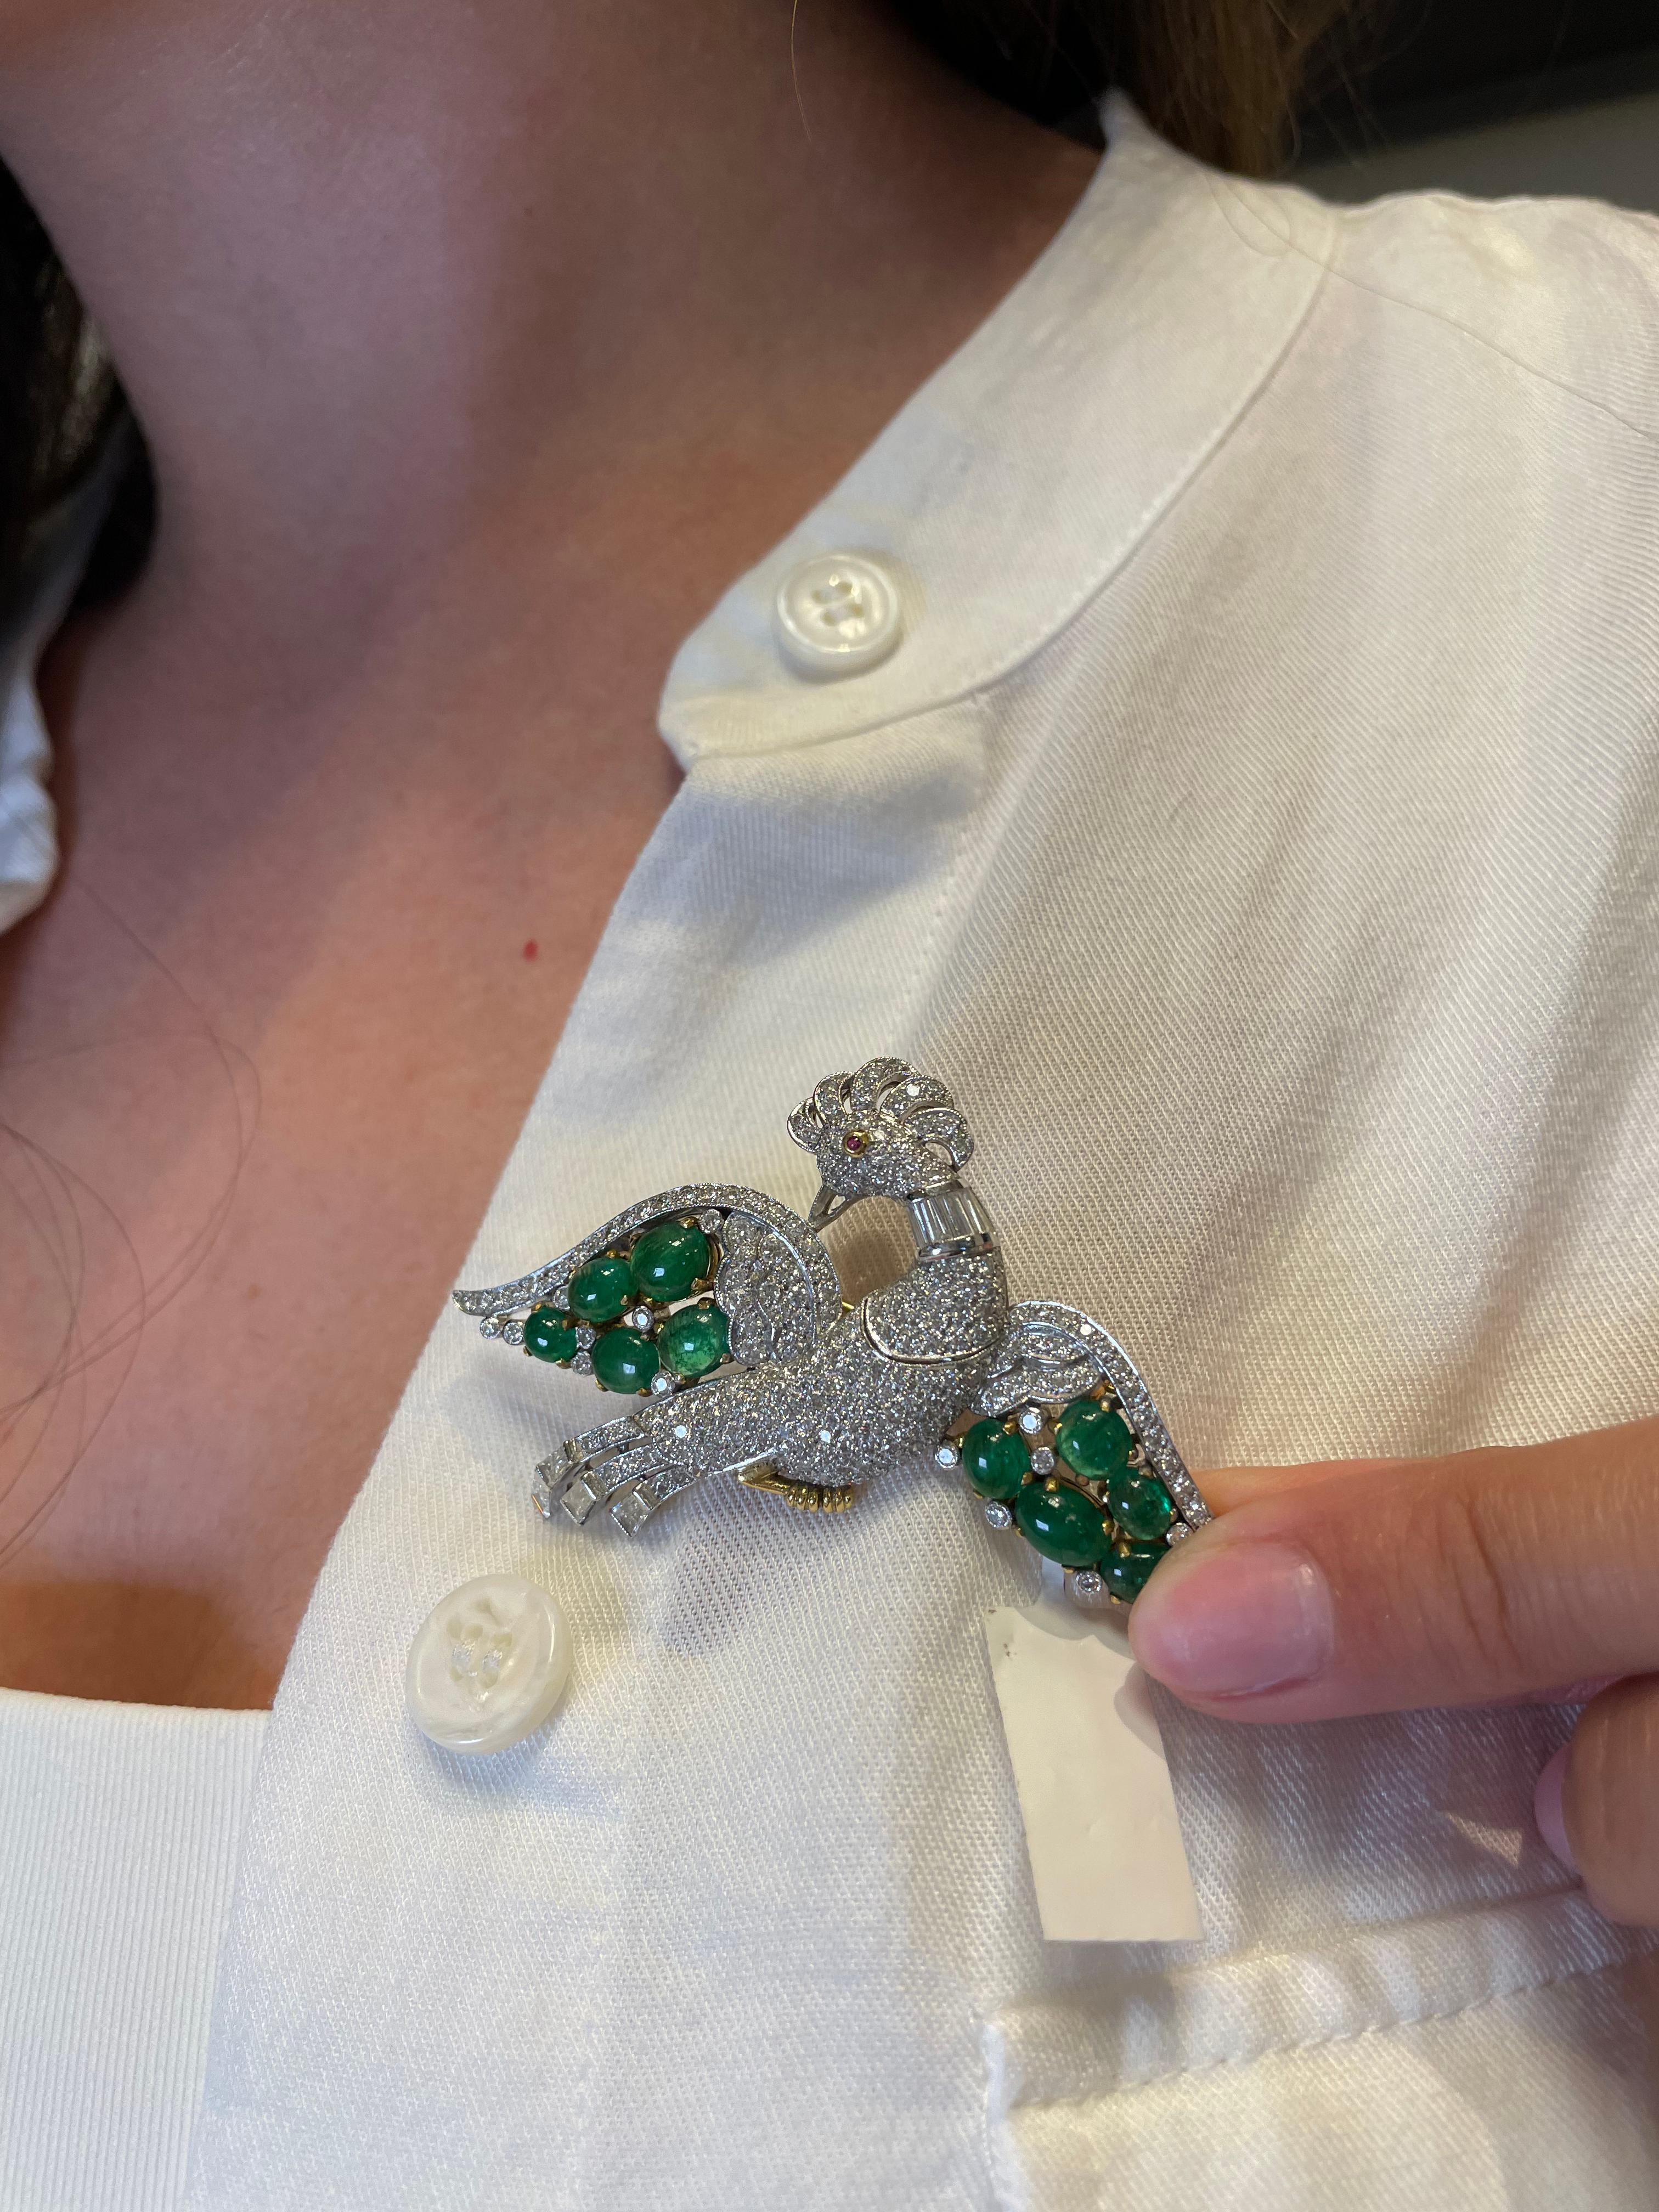 Vintage bird brooch with emeralds, diamonds, and ruby.
10 cabochon emeralds, approximately 5 carats. Round and baguette cut diamonds, approximately 3.50 carats, G/H color and VS2/SI1 clarity. 1 round ruby, approximately 0.03 carats. White and yellow